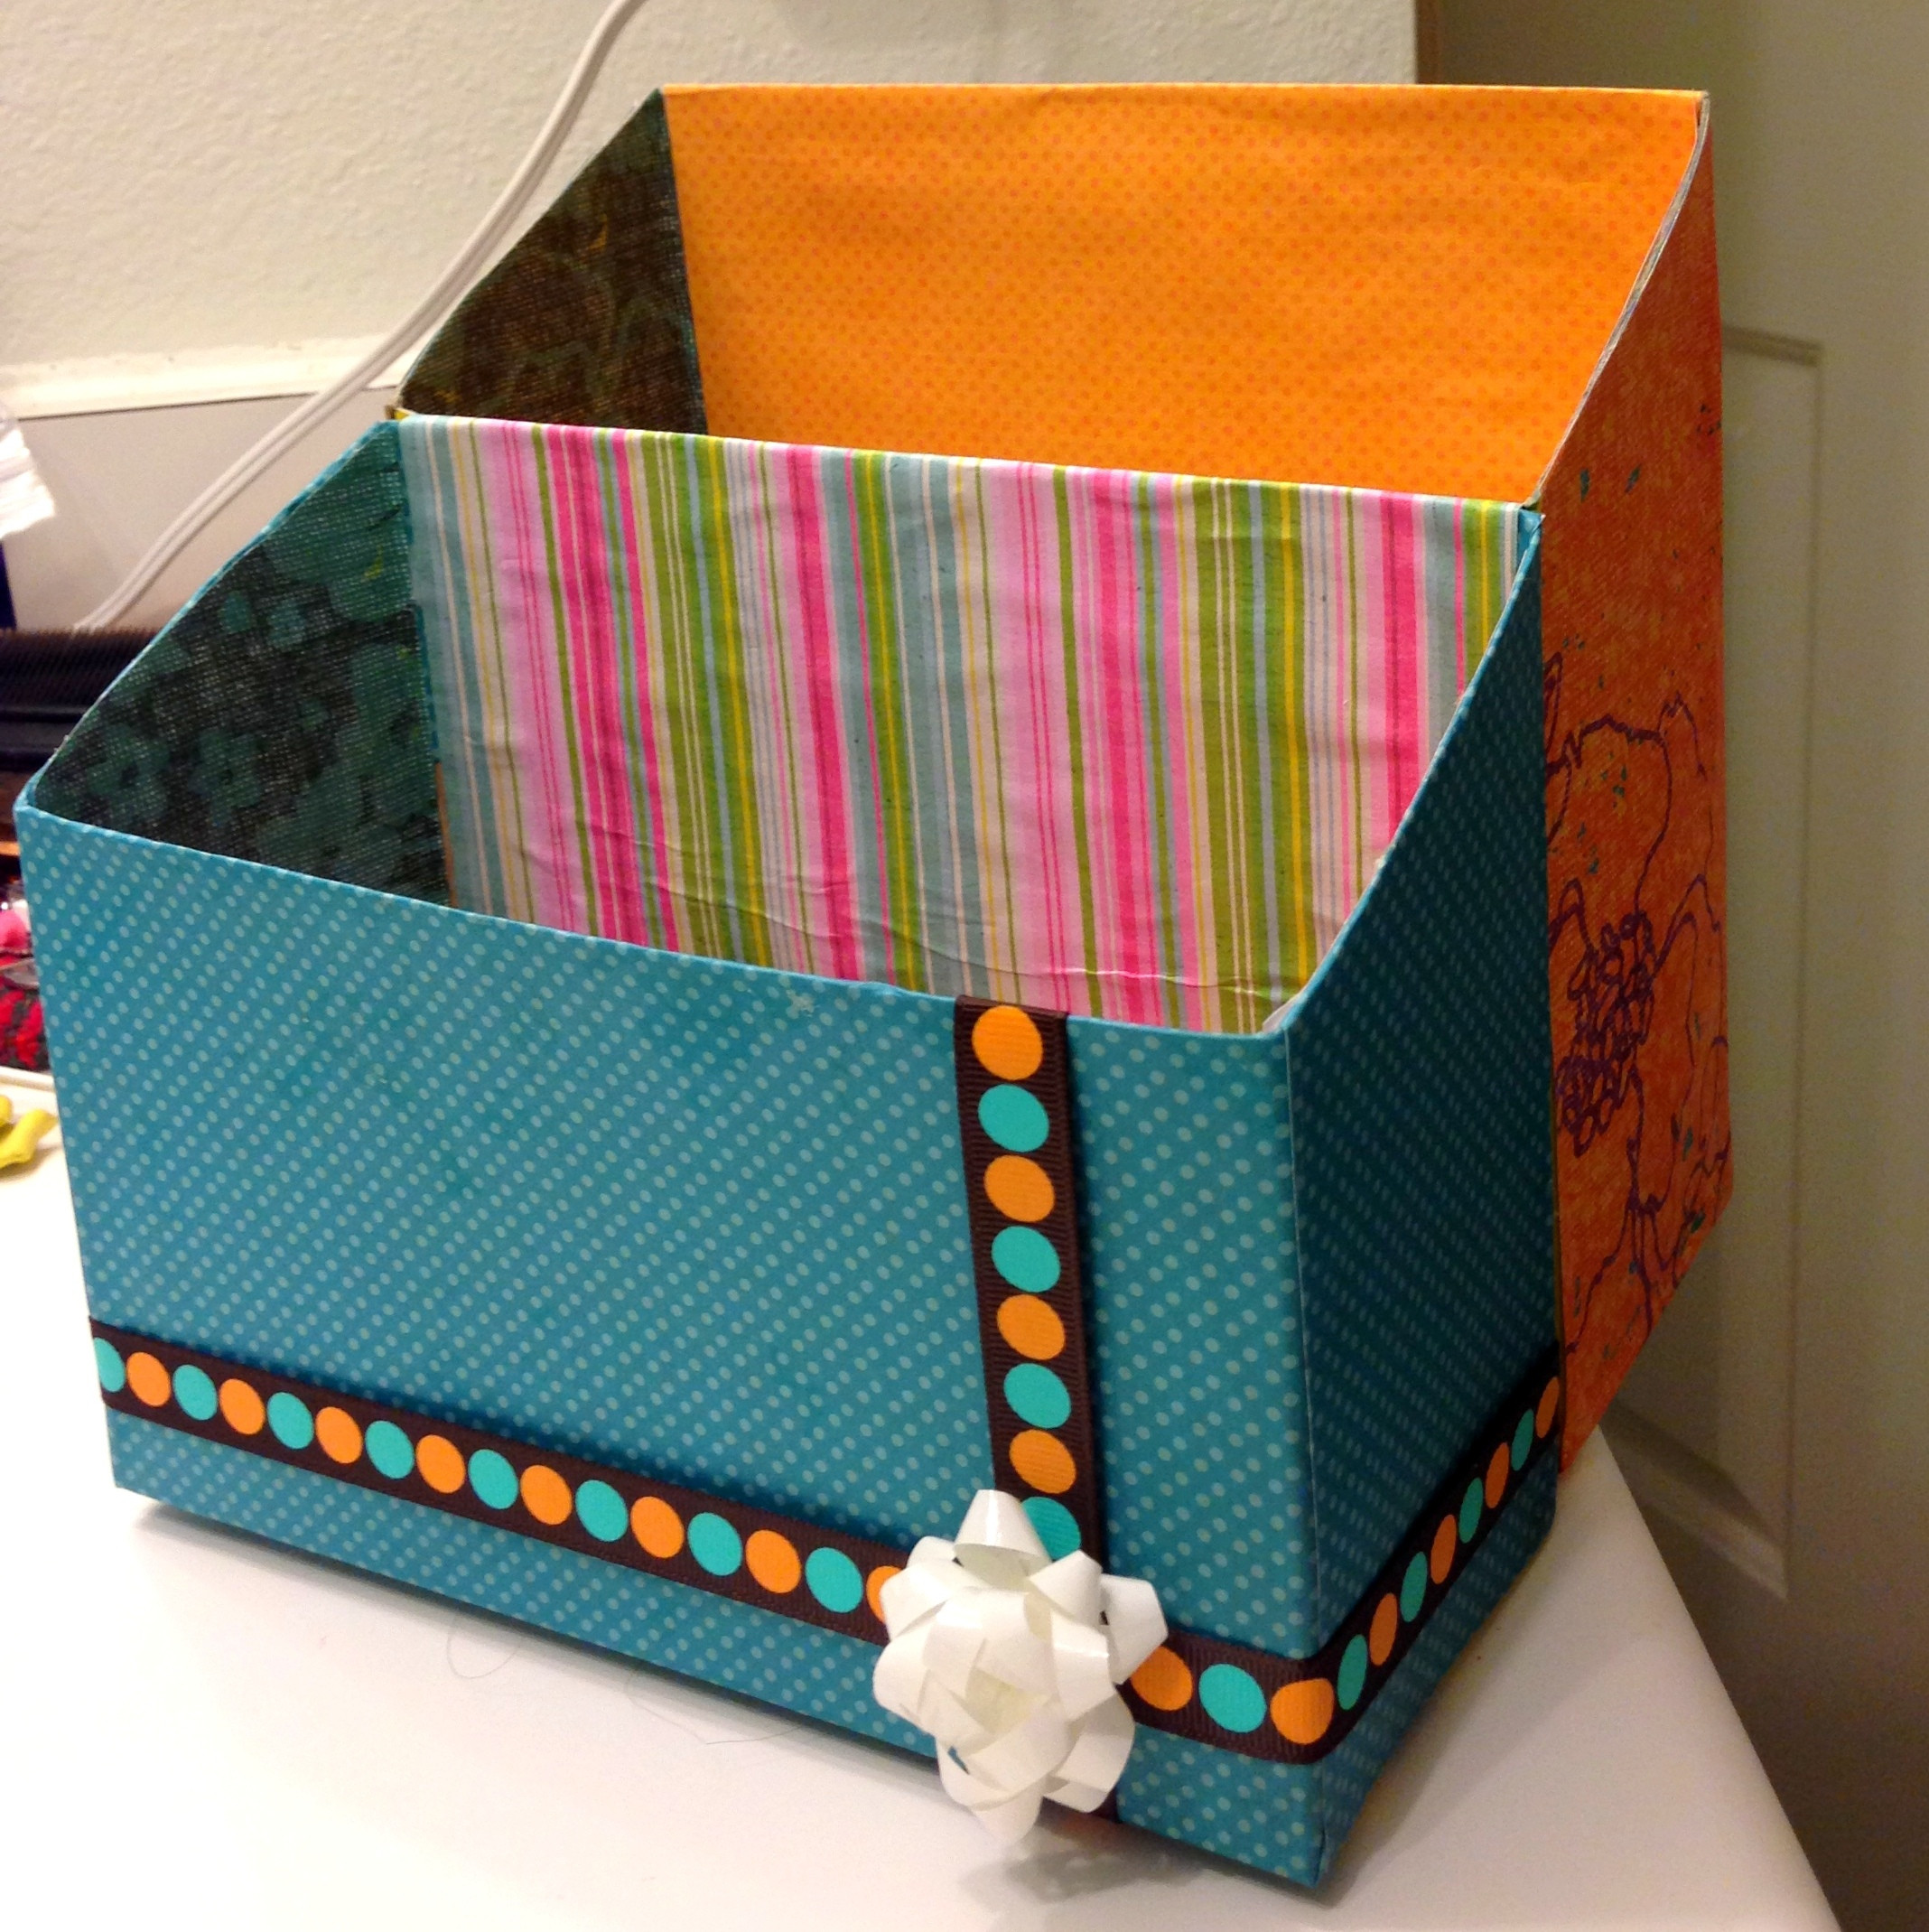 DIY Letter Organizer
 DIY mail organizer from cereal box